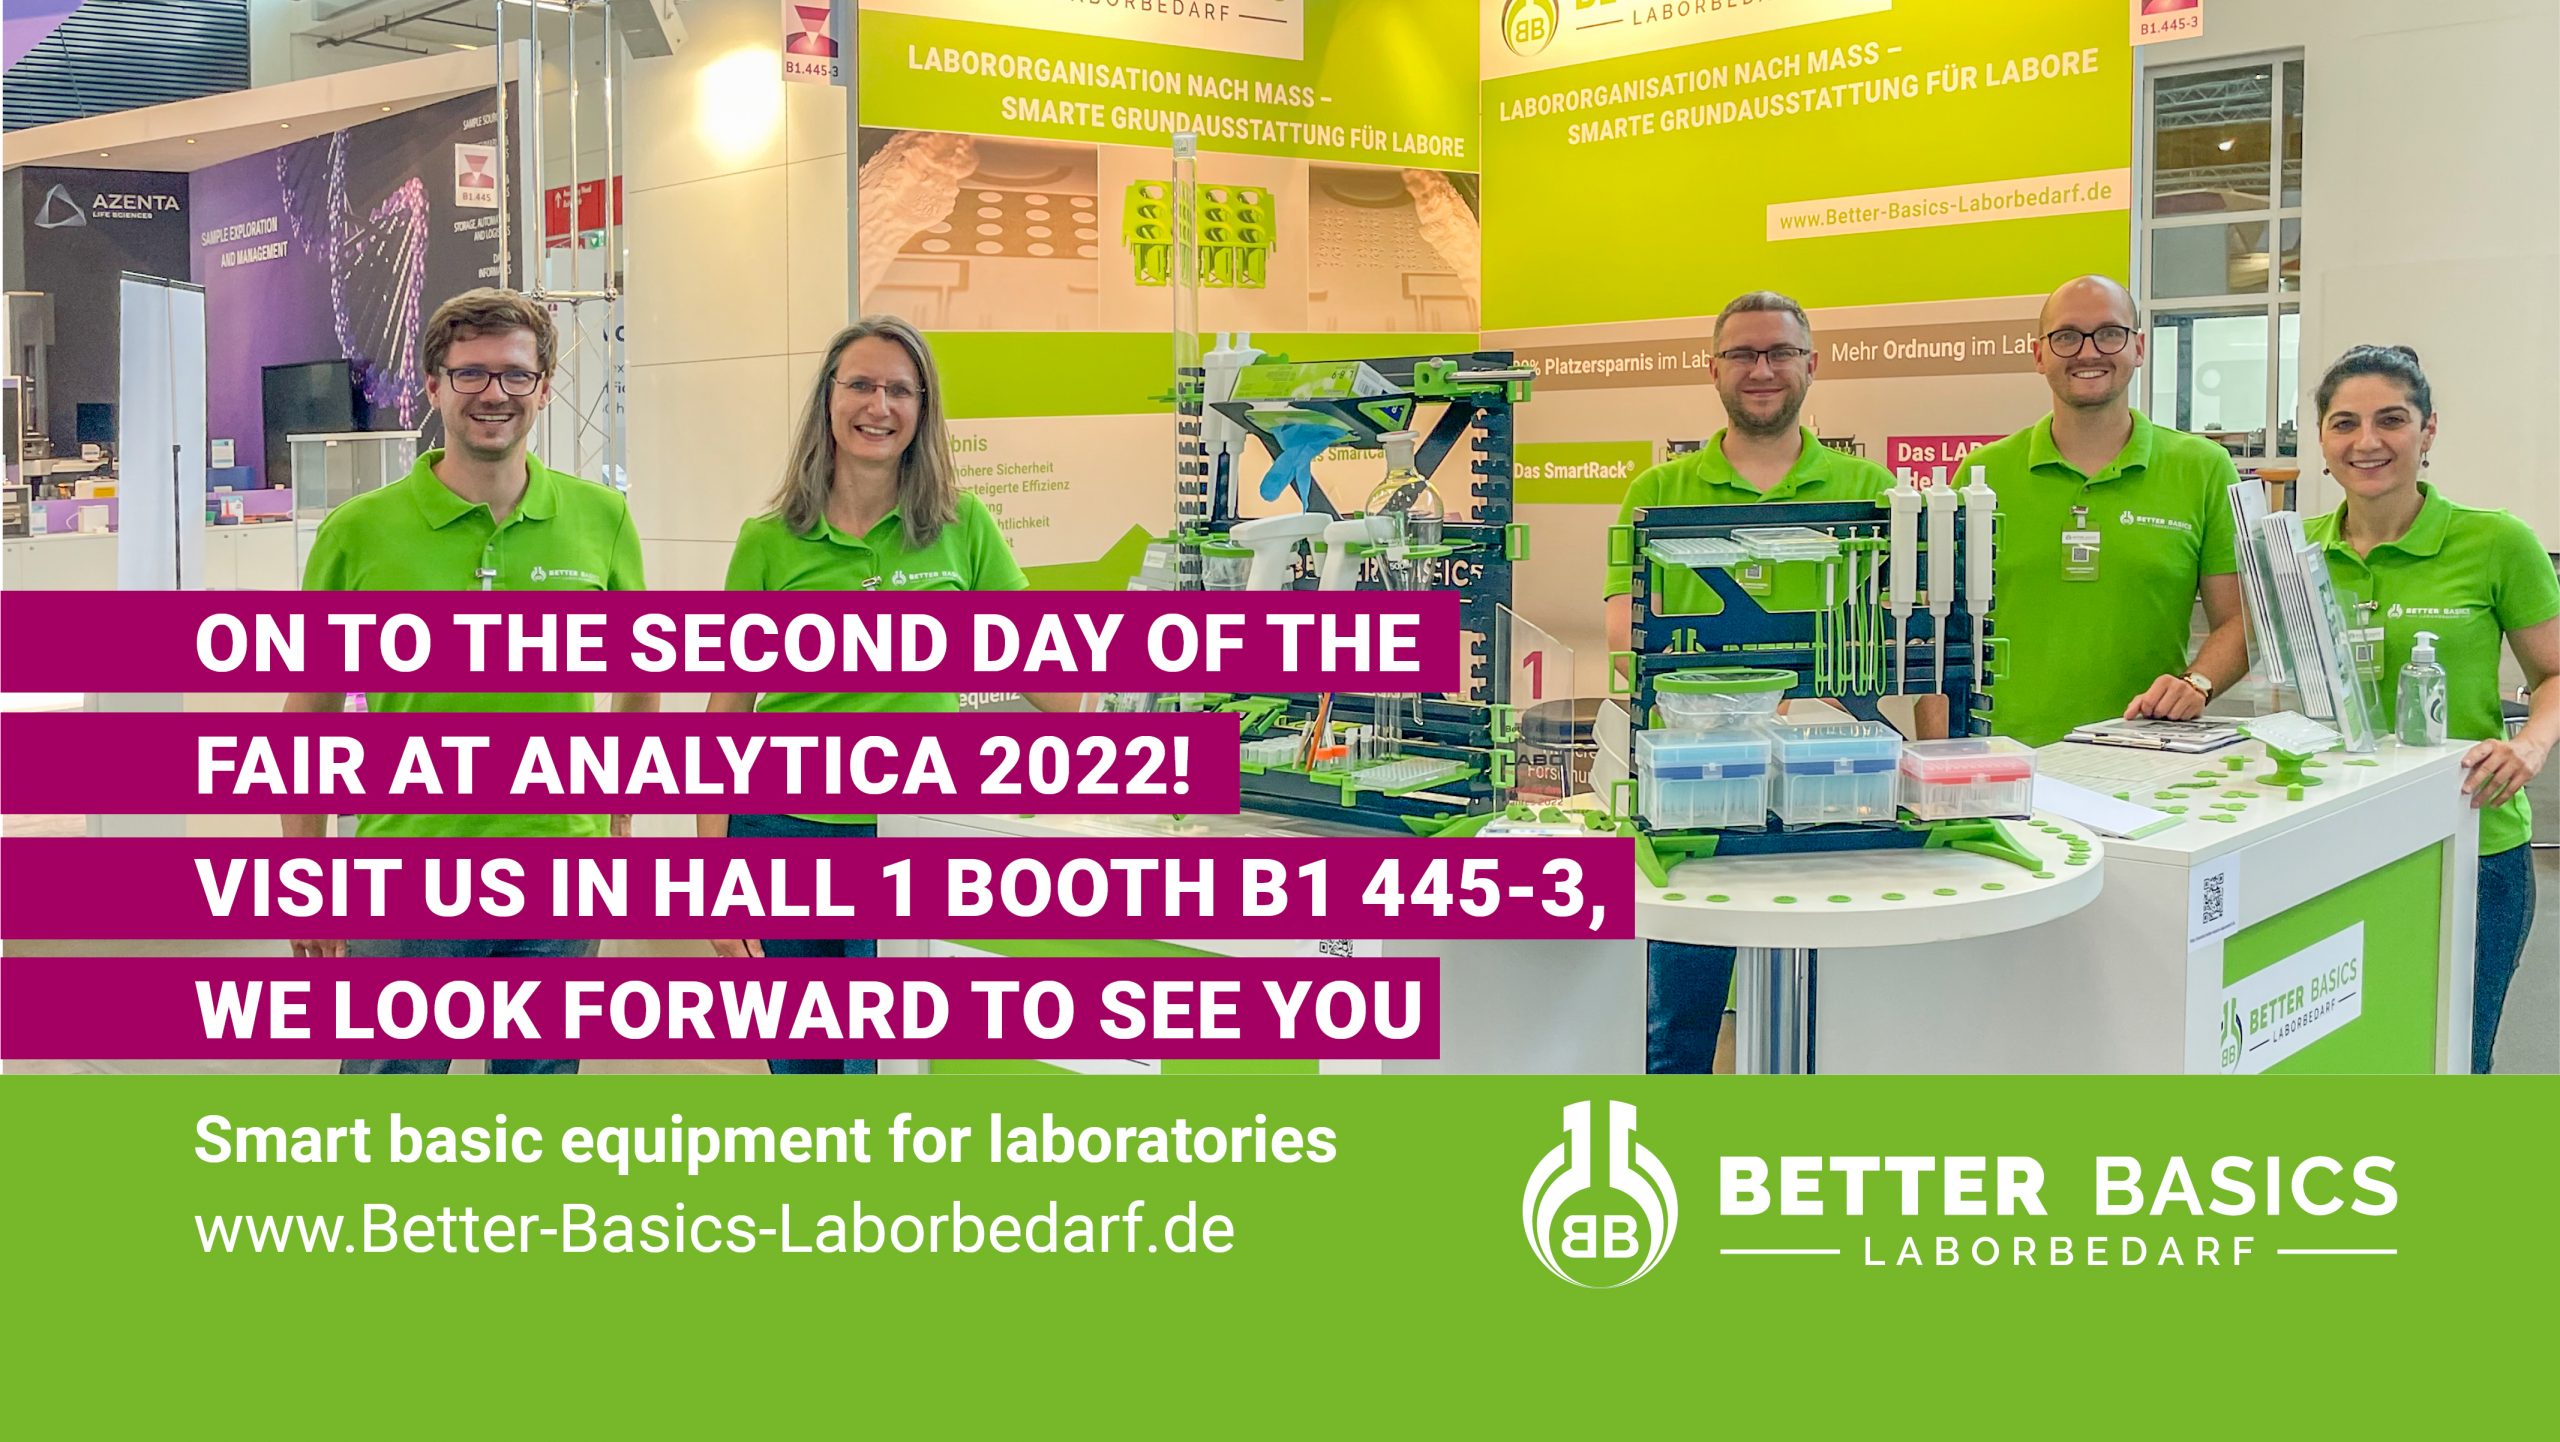 Better Basics Laborbedarf GmbH News Beitrag EN- On the second day of the fair at Analytica 2022! visit us in hall 1 booth B1 445-3, we look forward to see you